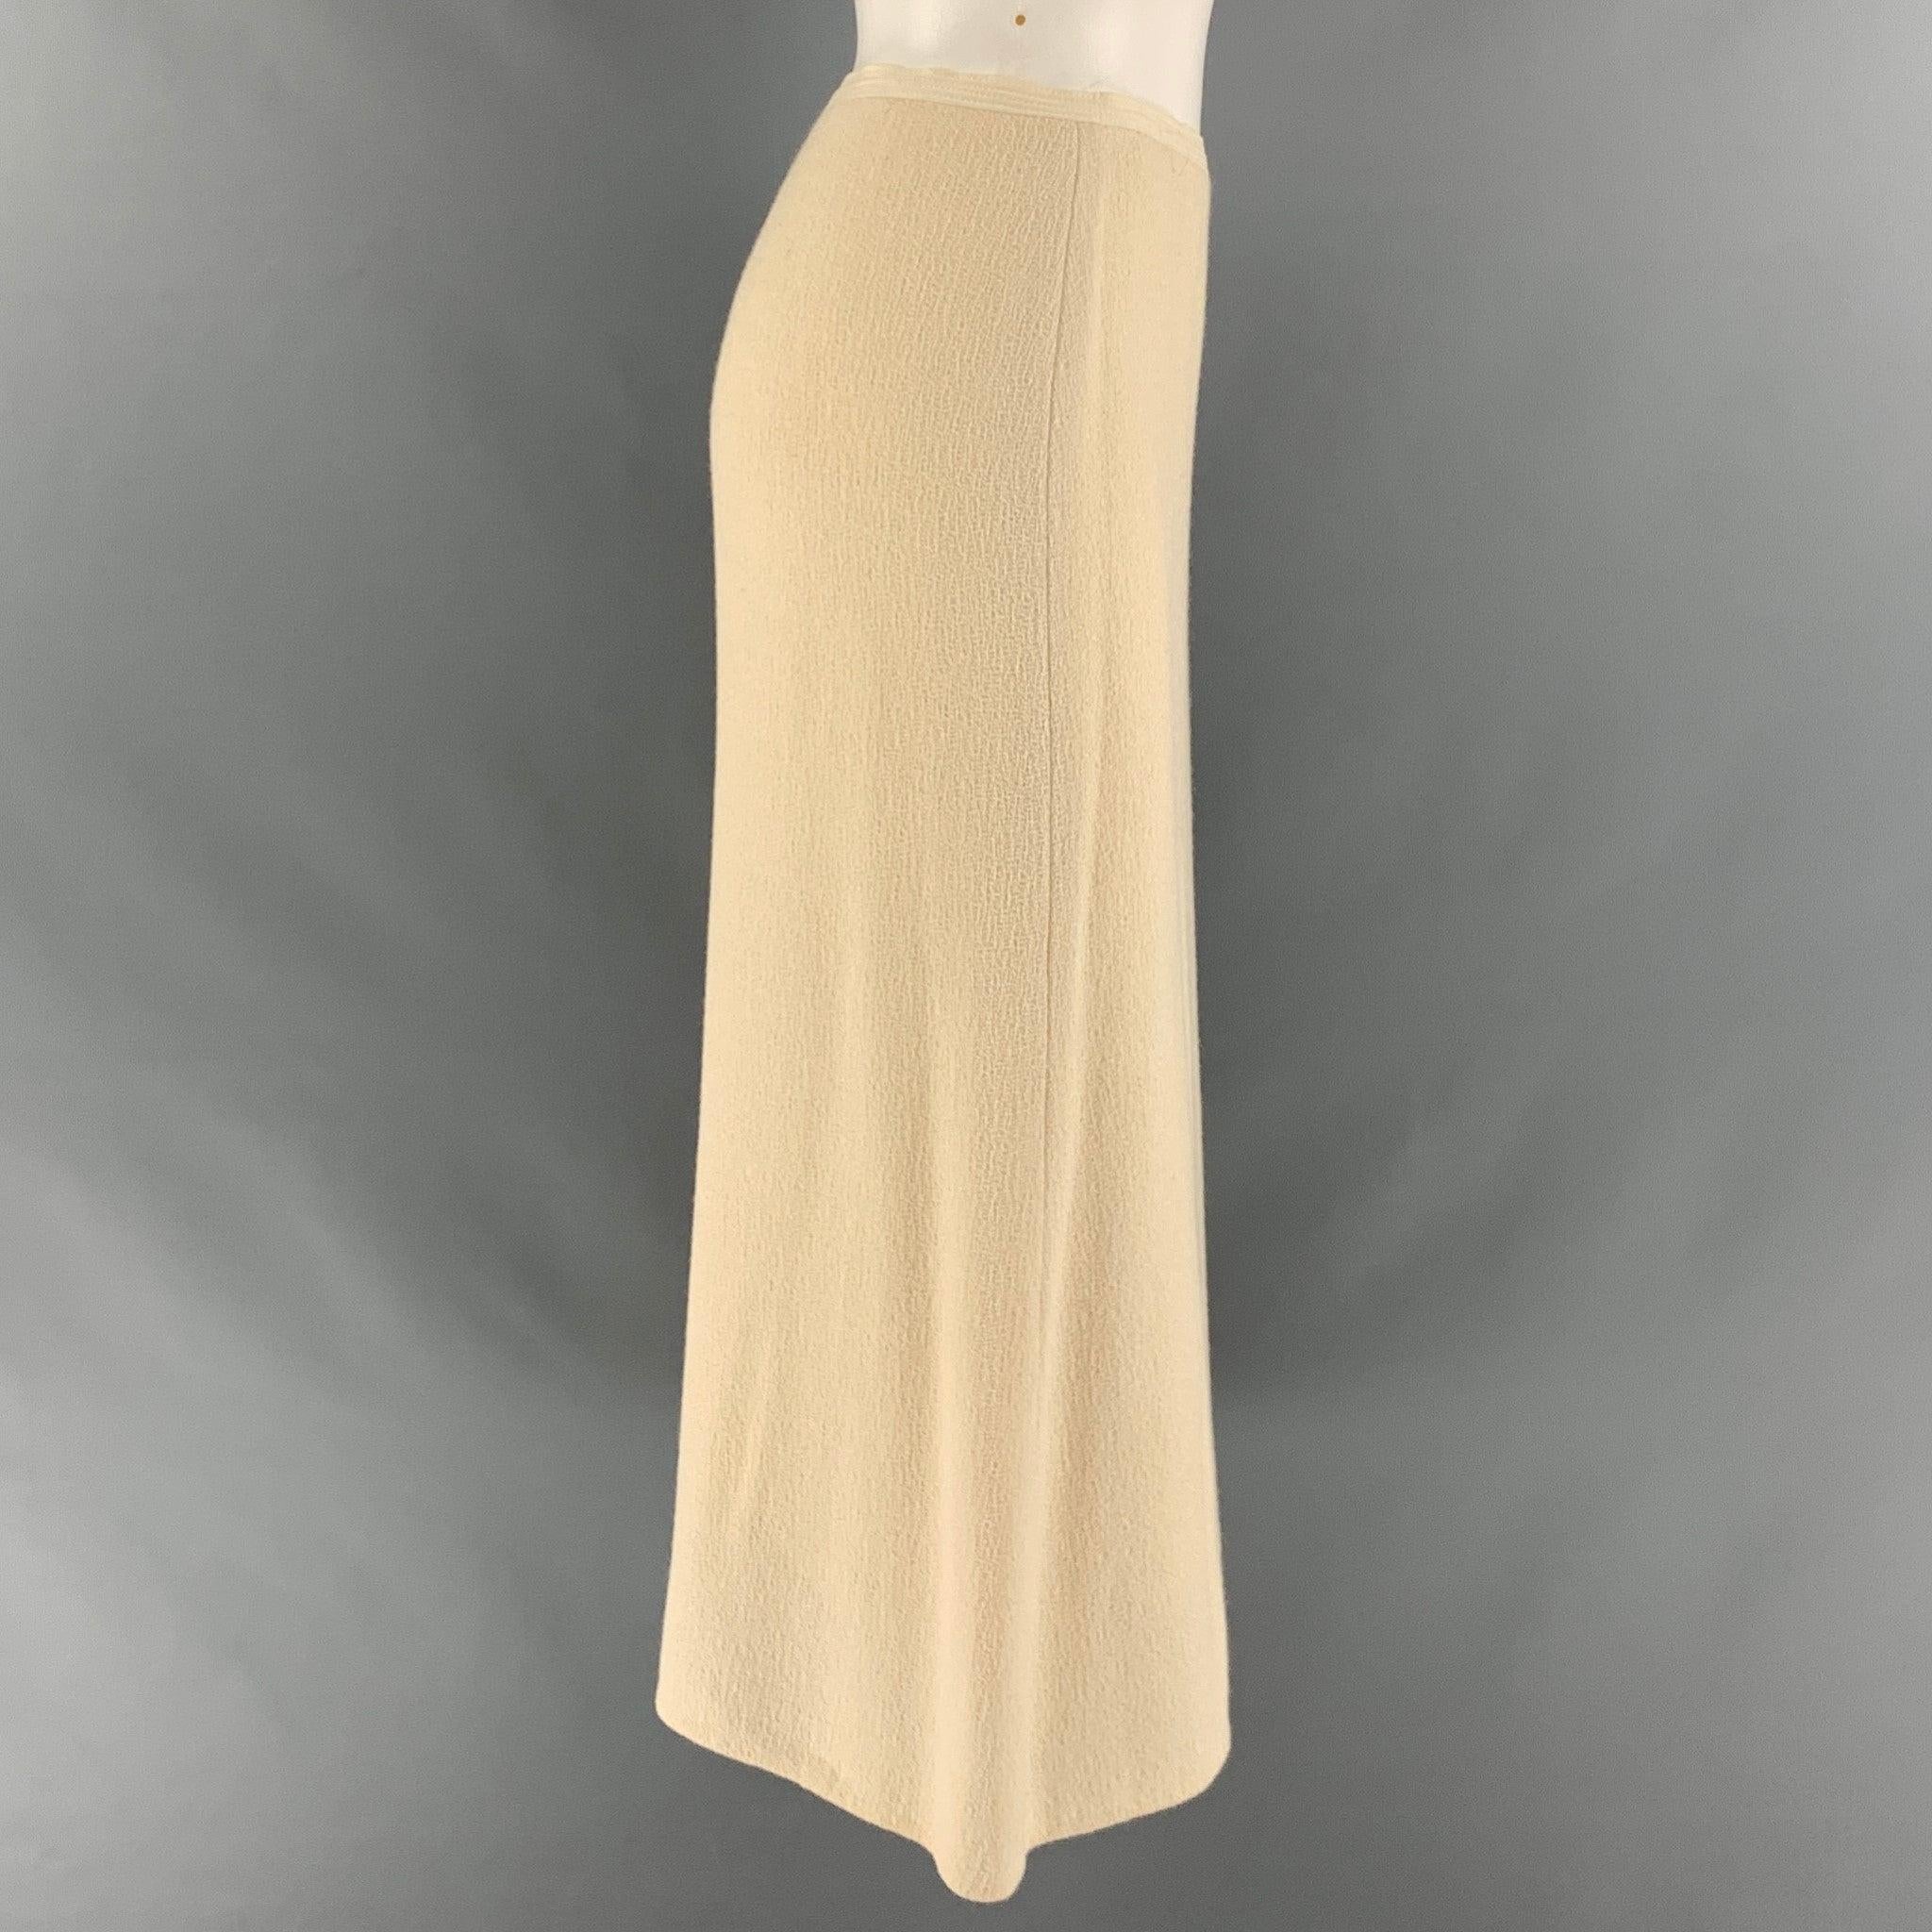 NARCISO RODRIGUEZ skirt comes in a cream viscose and wool woven material featuring a A-line silhouette, and a center side zip up closure. Made in Italy.Excellent Pre-Owned Condition. 

Marked:   41 

Measurements: 
  Waist: 31 inches Hip: 37 inches